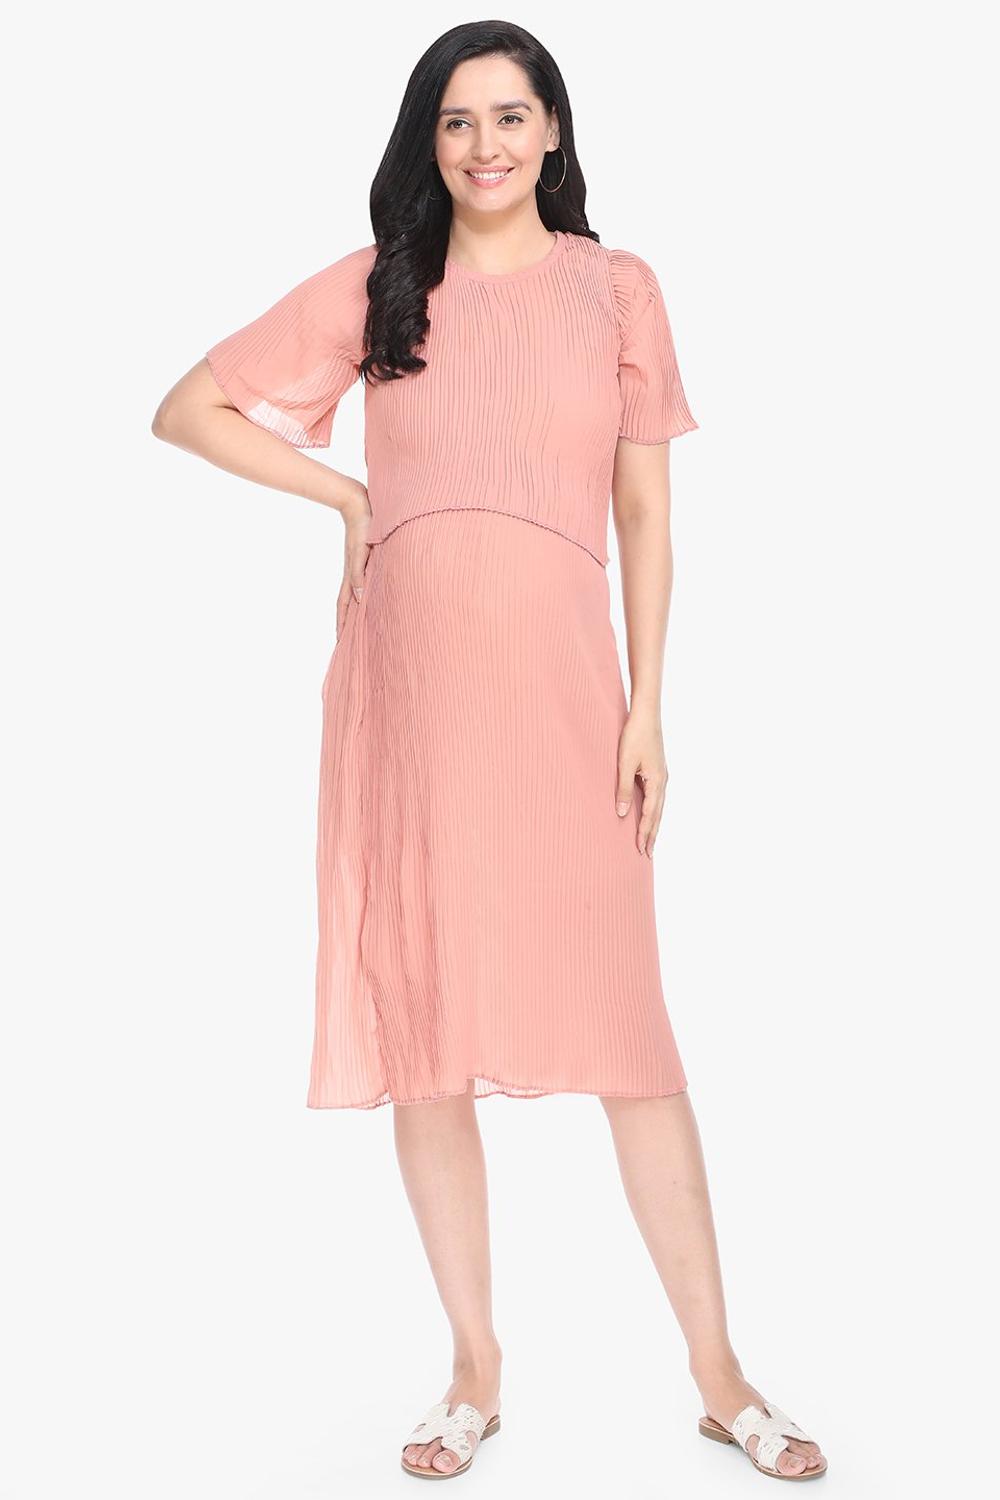 Mee Mee Fashionable Maternity Dress with Feeding Z